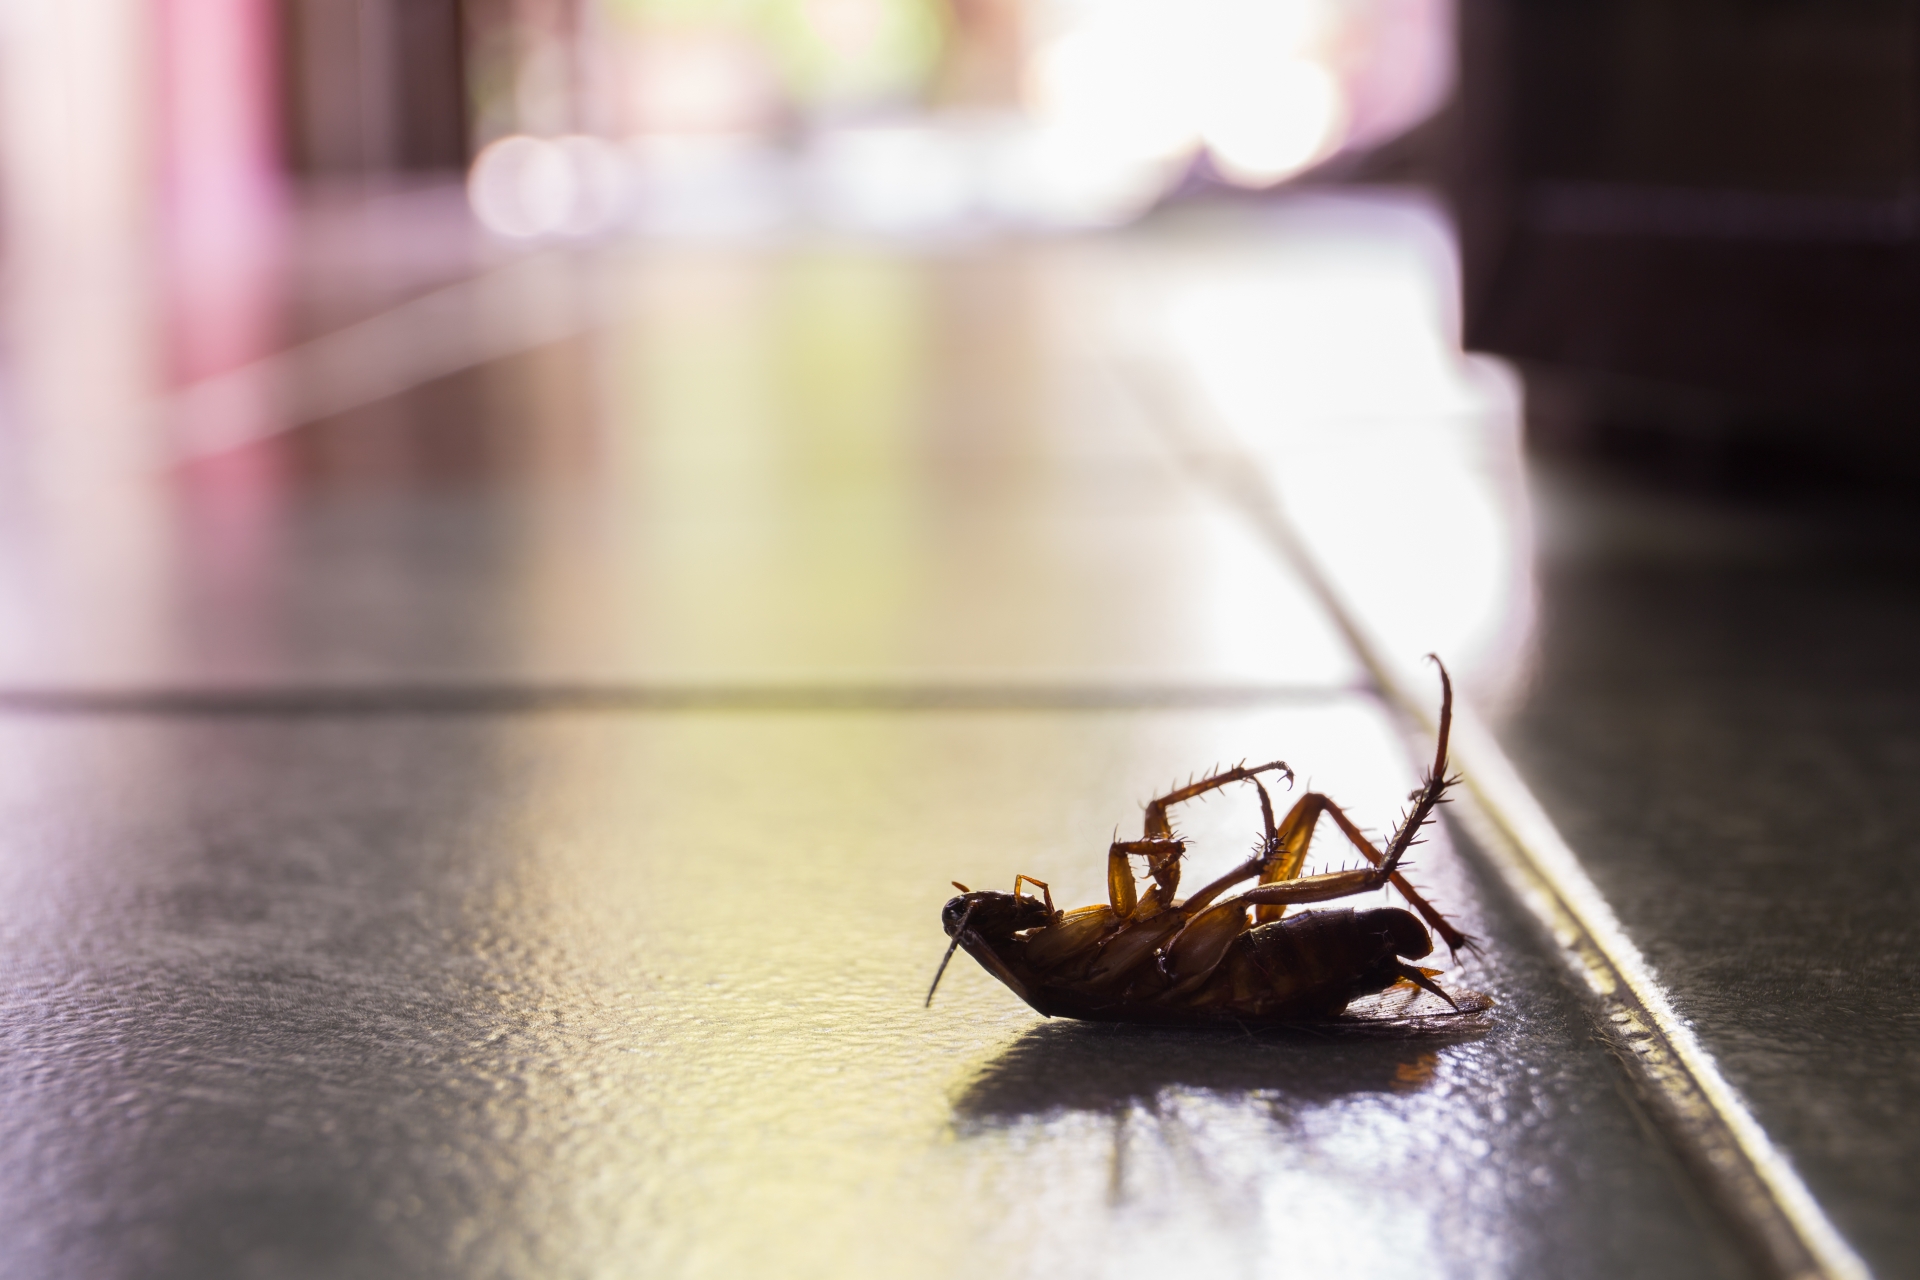 Cockroach Control, Pest Control in Abbey Wood, SE2. Call Now 020 8166 9746